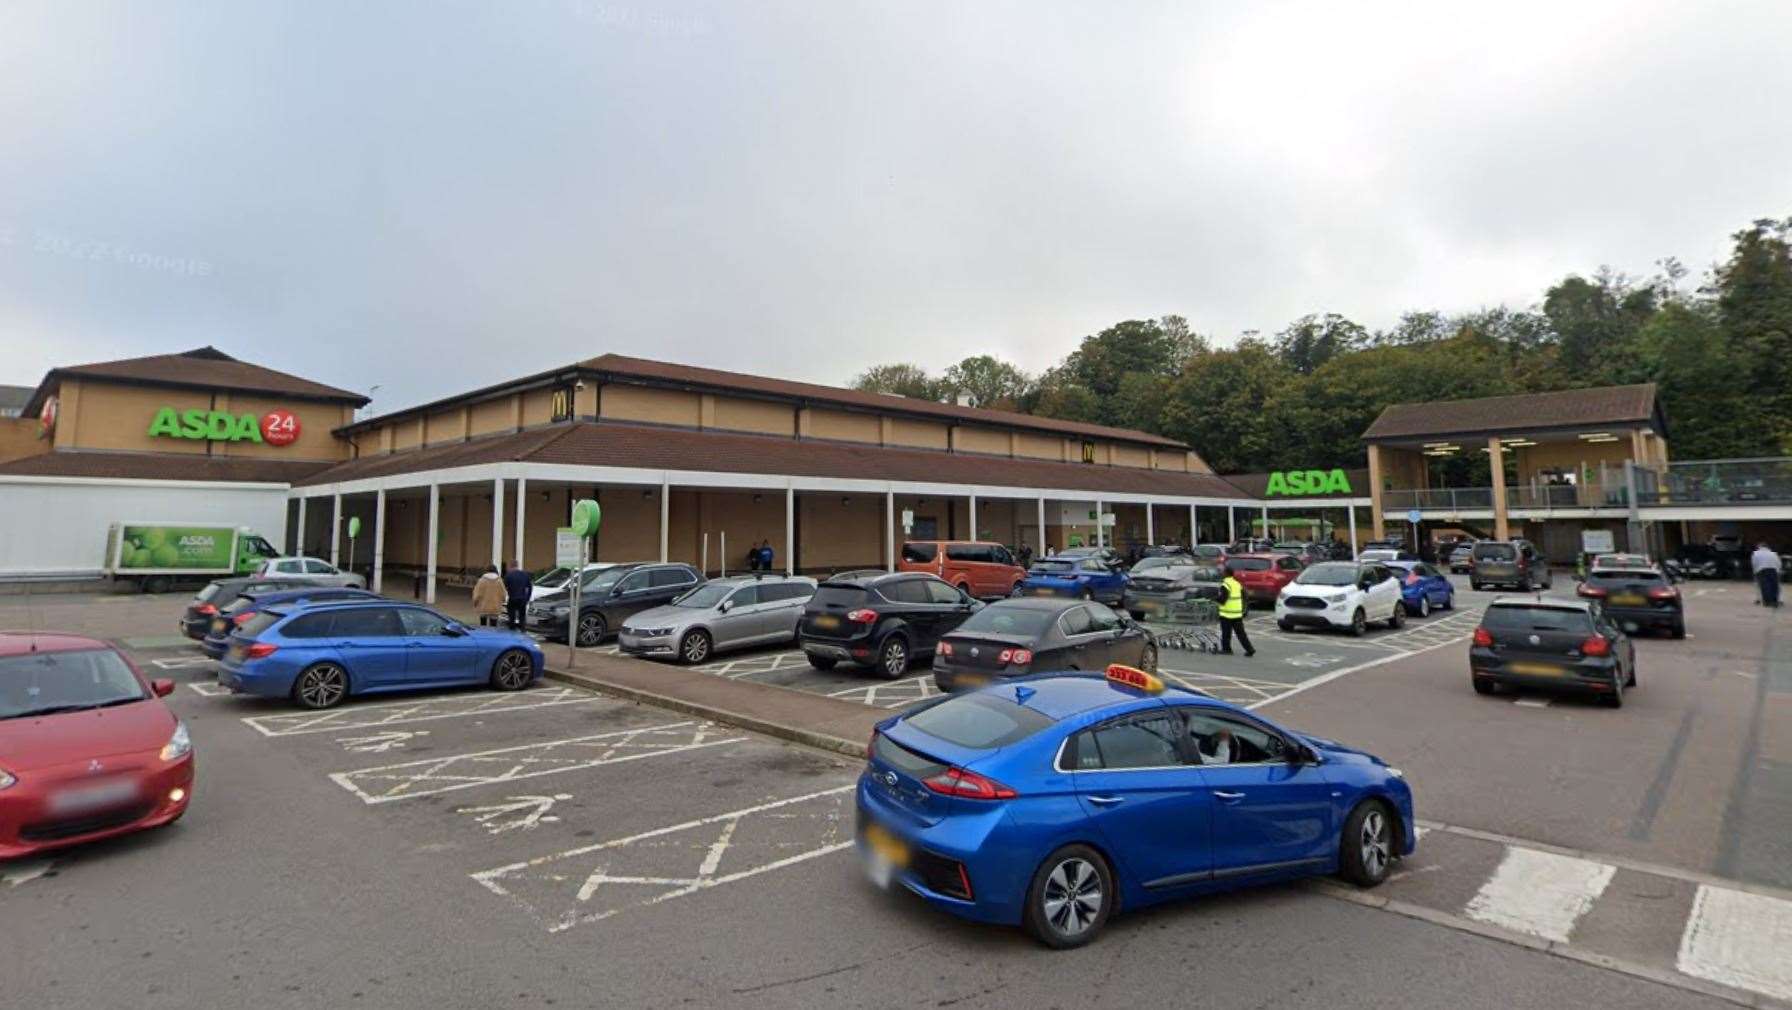 The incident happened at Asda in the Imperial Retail Park, Gravesend. Picture: Google